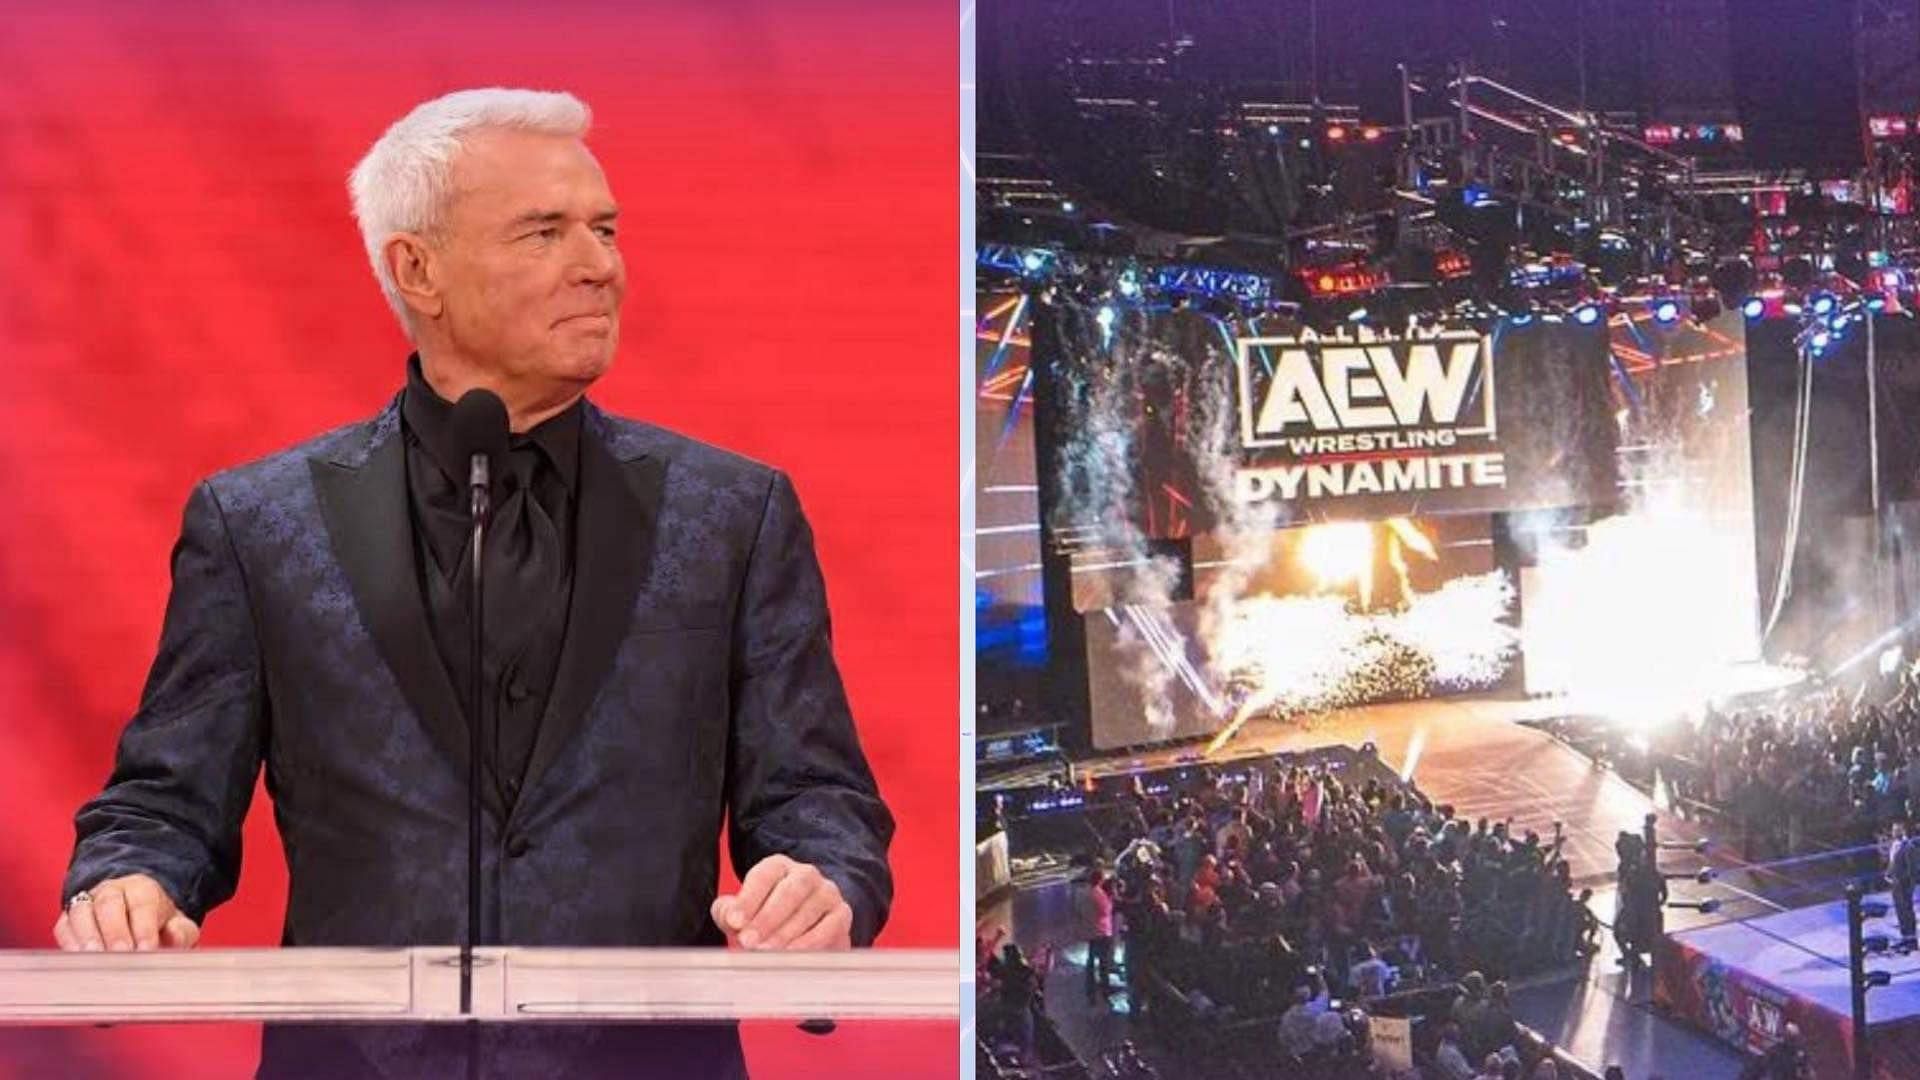 Eric Bischoff (left) and AEW Dynamite stage (right)